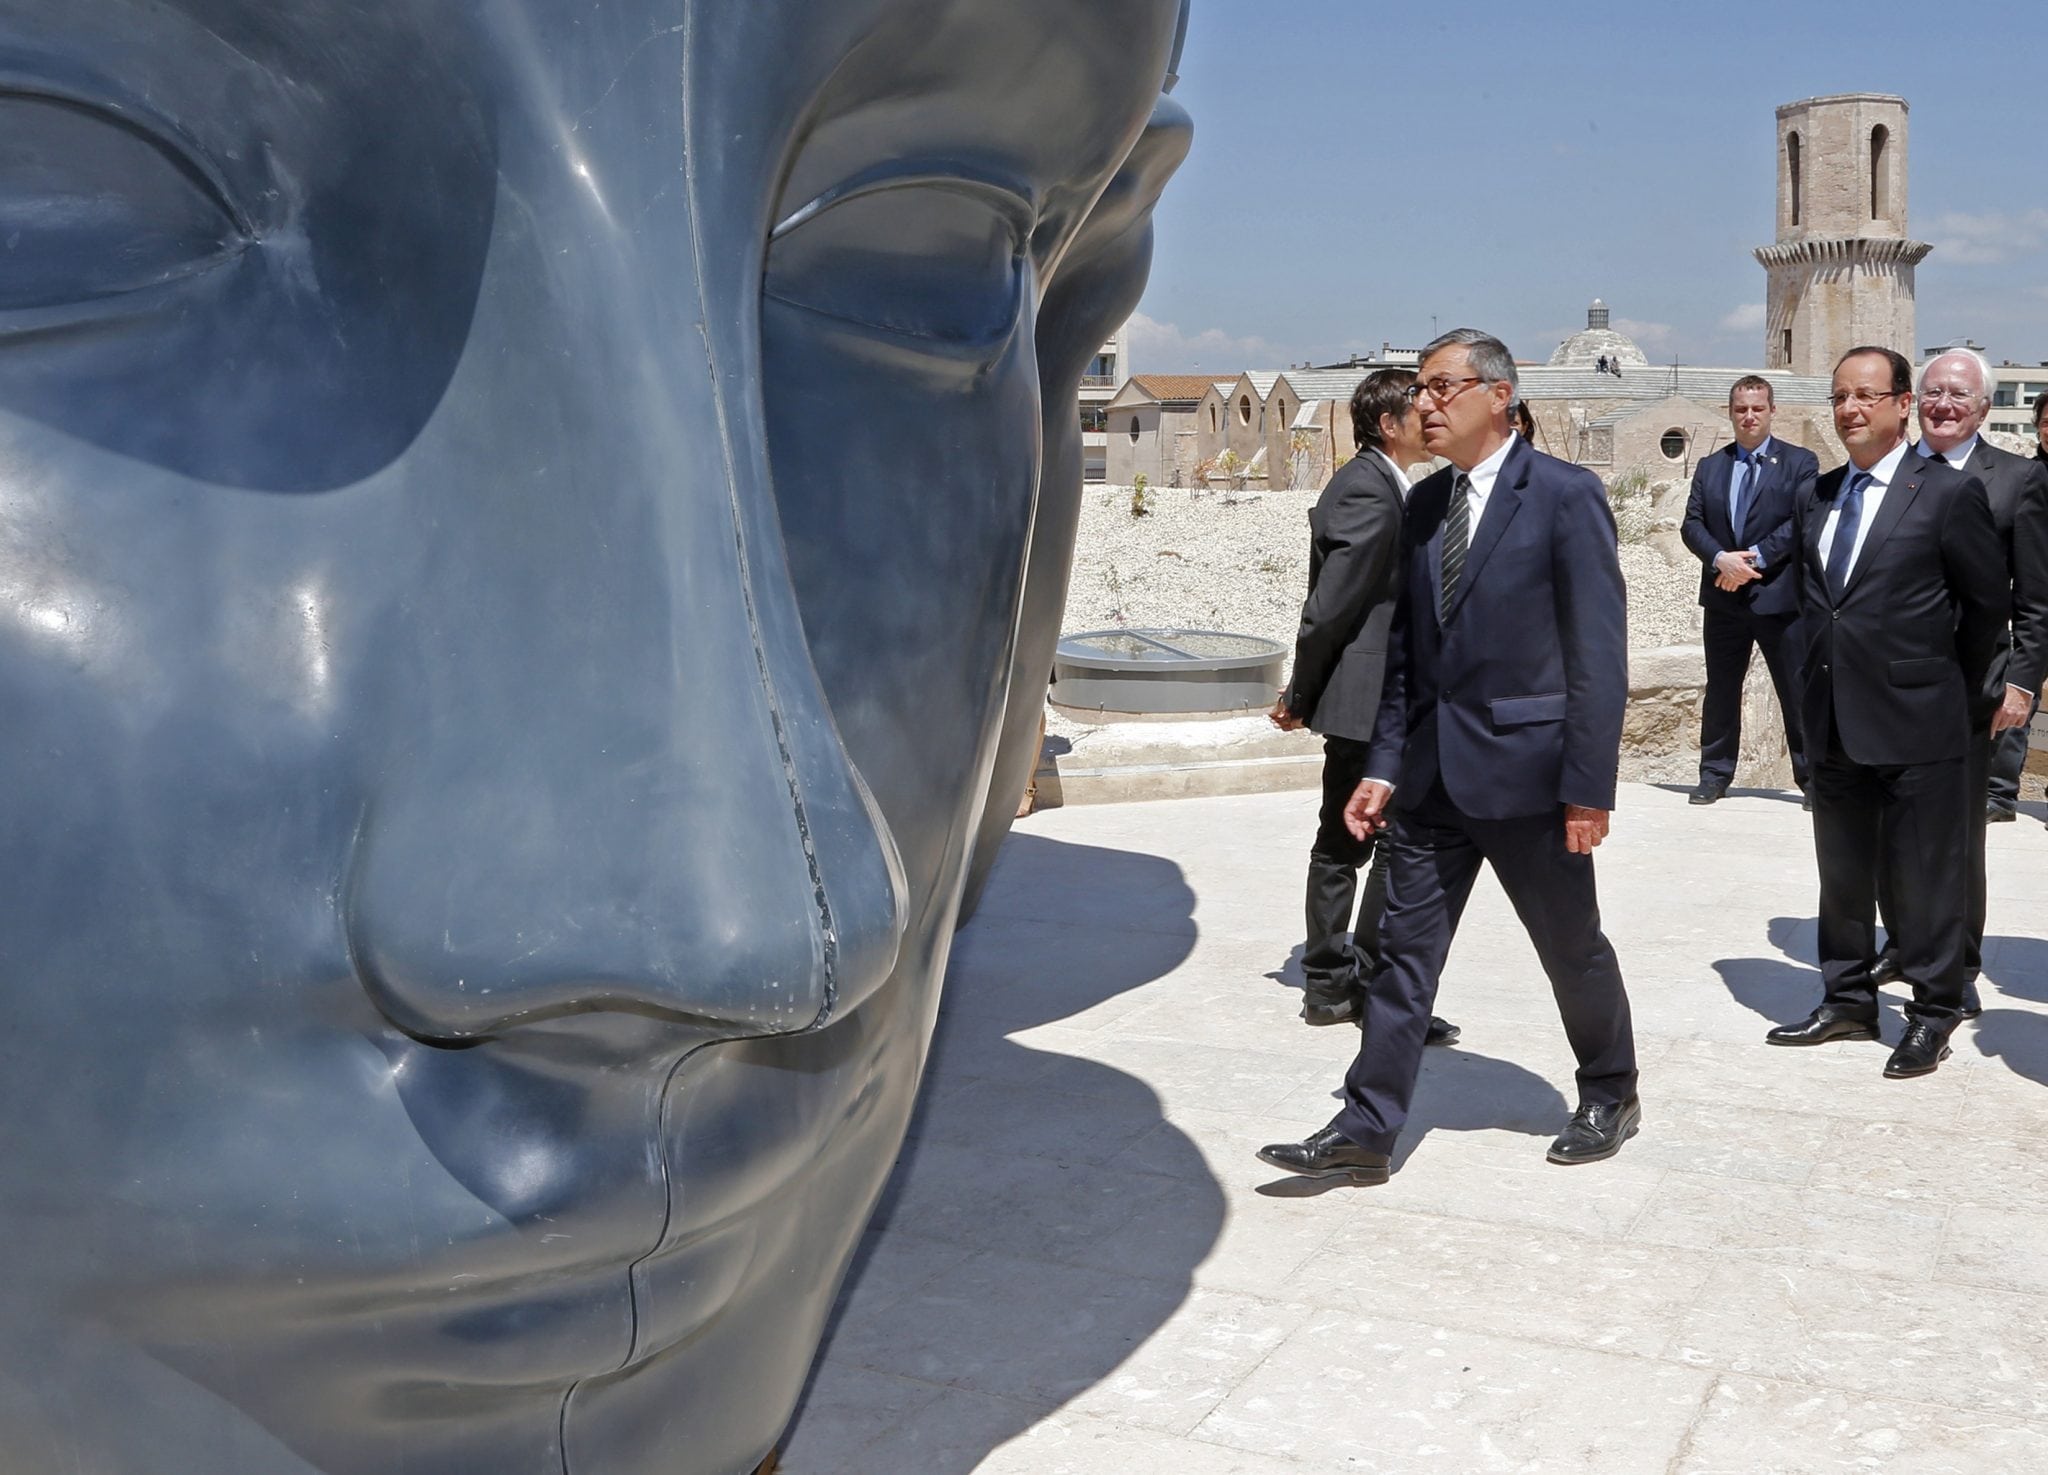 French President Francois Hollande, right, with MuCEM president Suzzarelli, center, seen during his visit to the Museum of Civilizations from Europe and the Mediterranean (MuCEM) in Marseille, southern France, Tuesday June 4, 2013. 